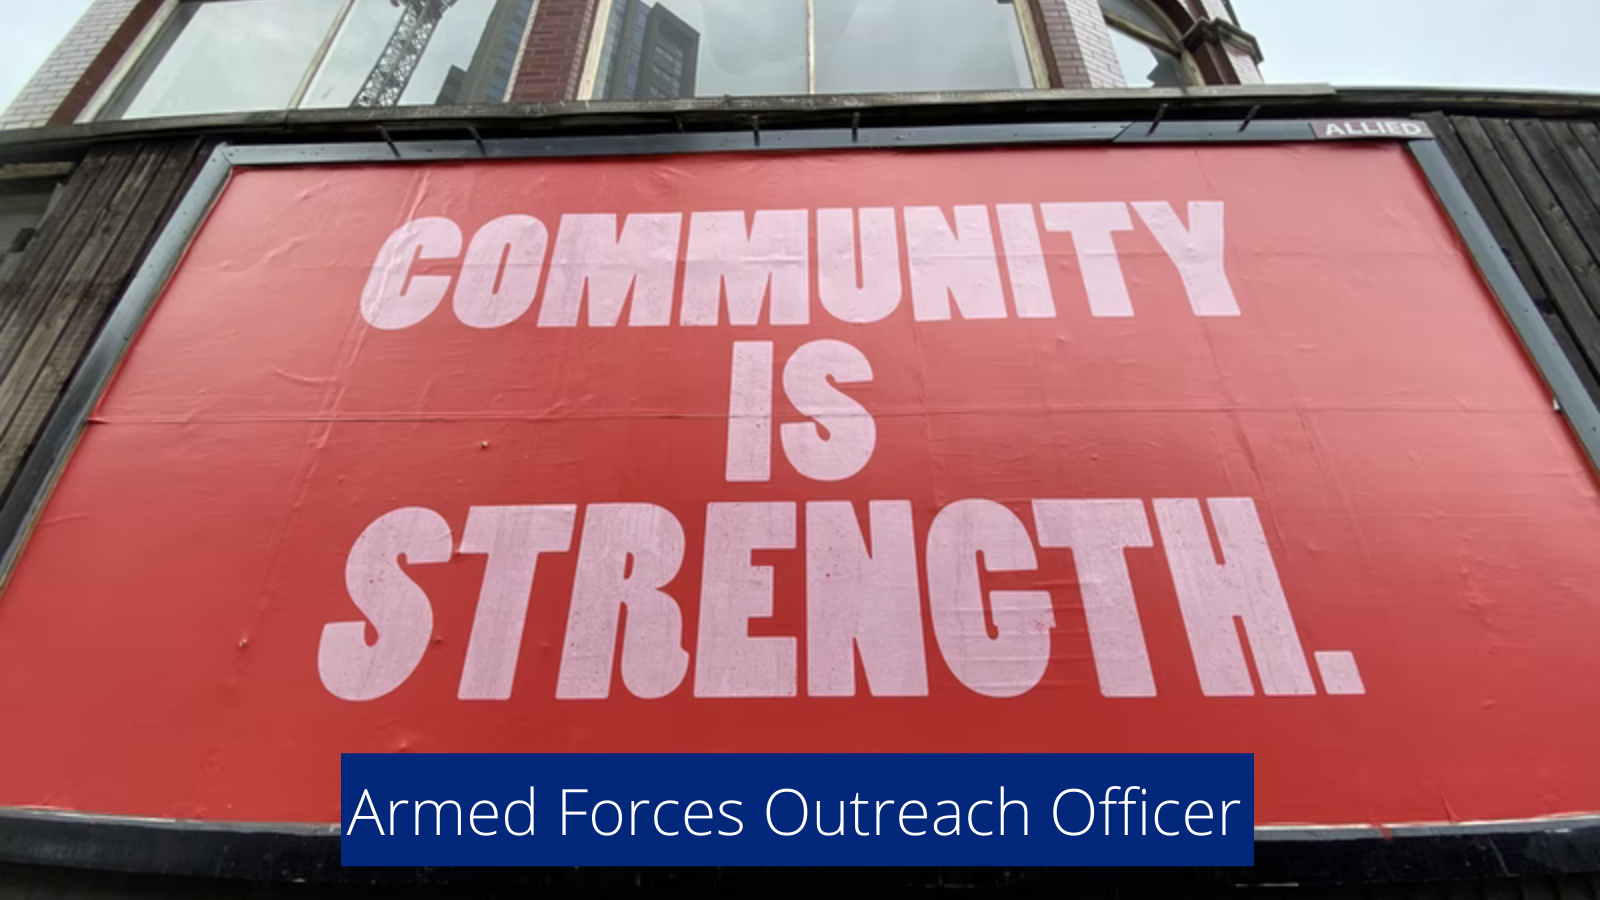 Large billboard sign that says community is strength